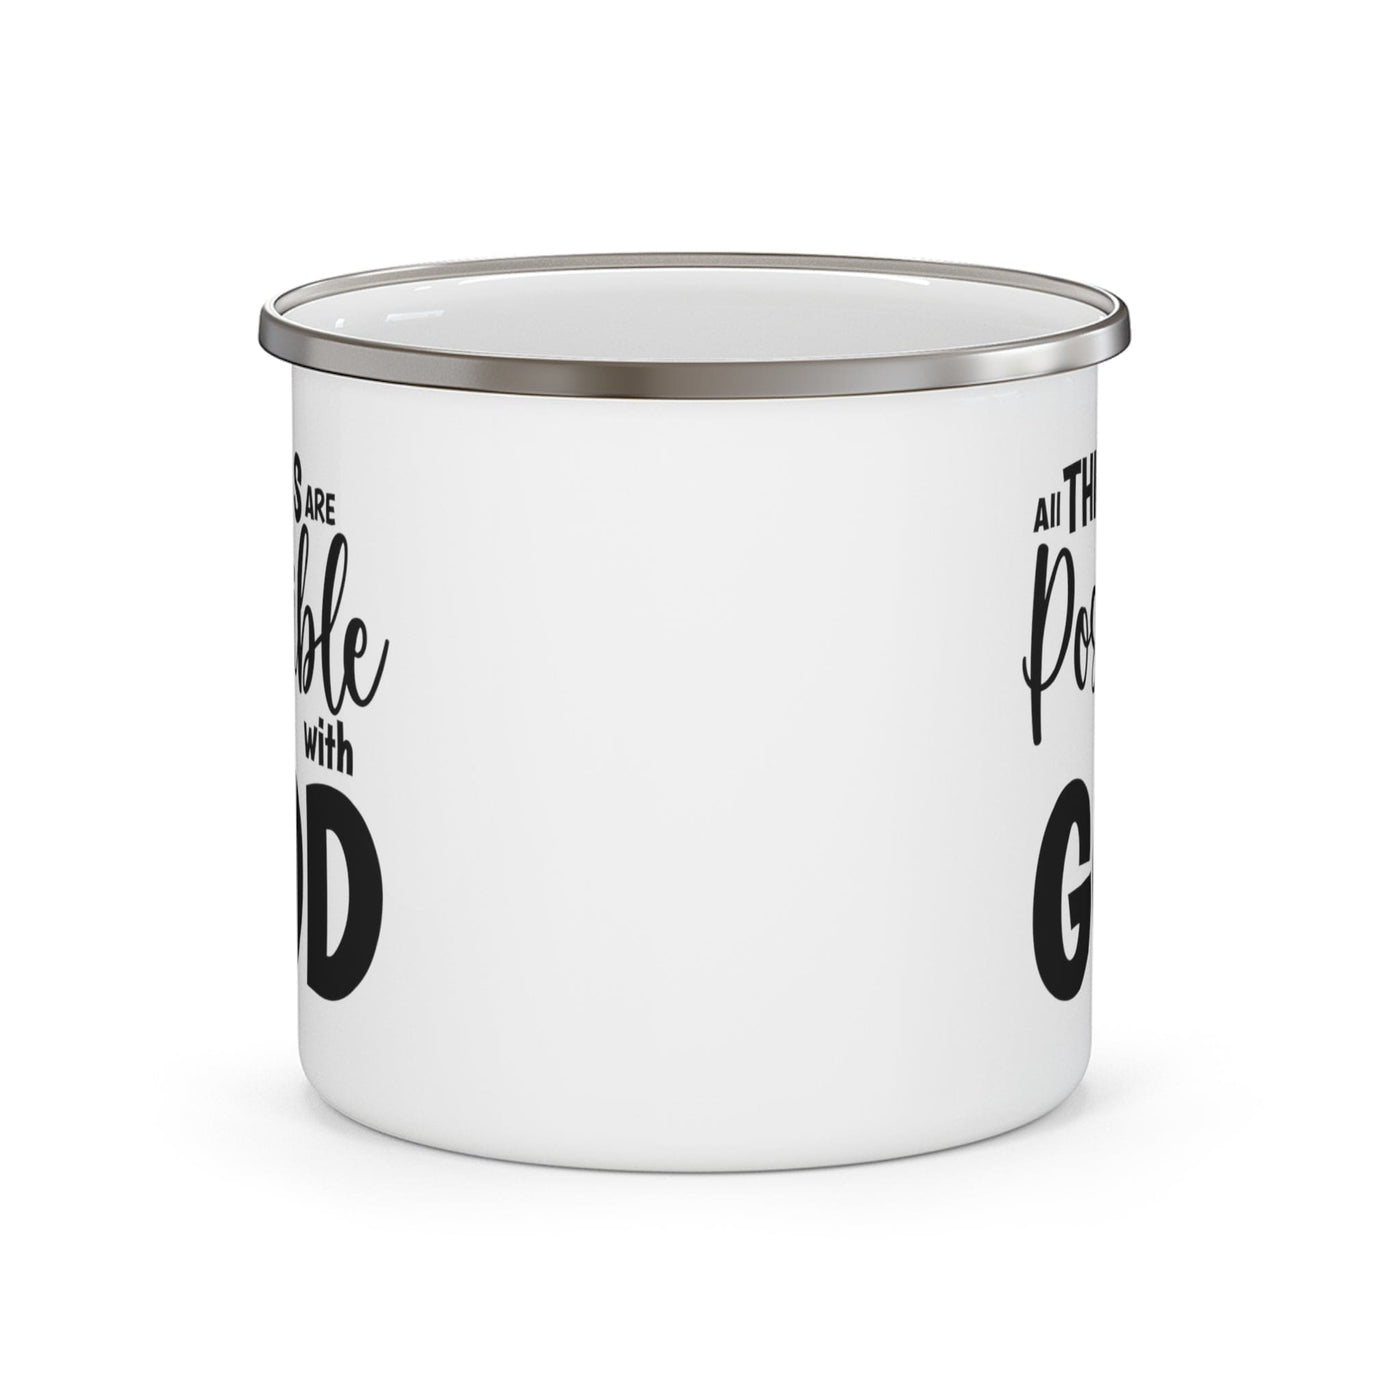 Enamel Camping Mug All Things Are Possible With God - Black - Decorative